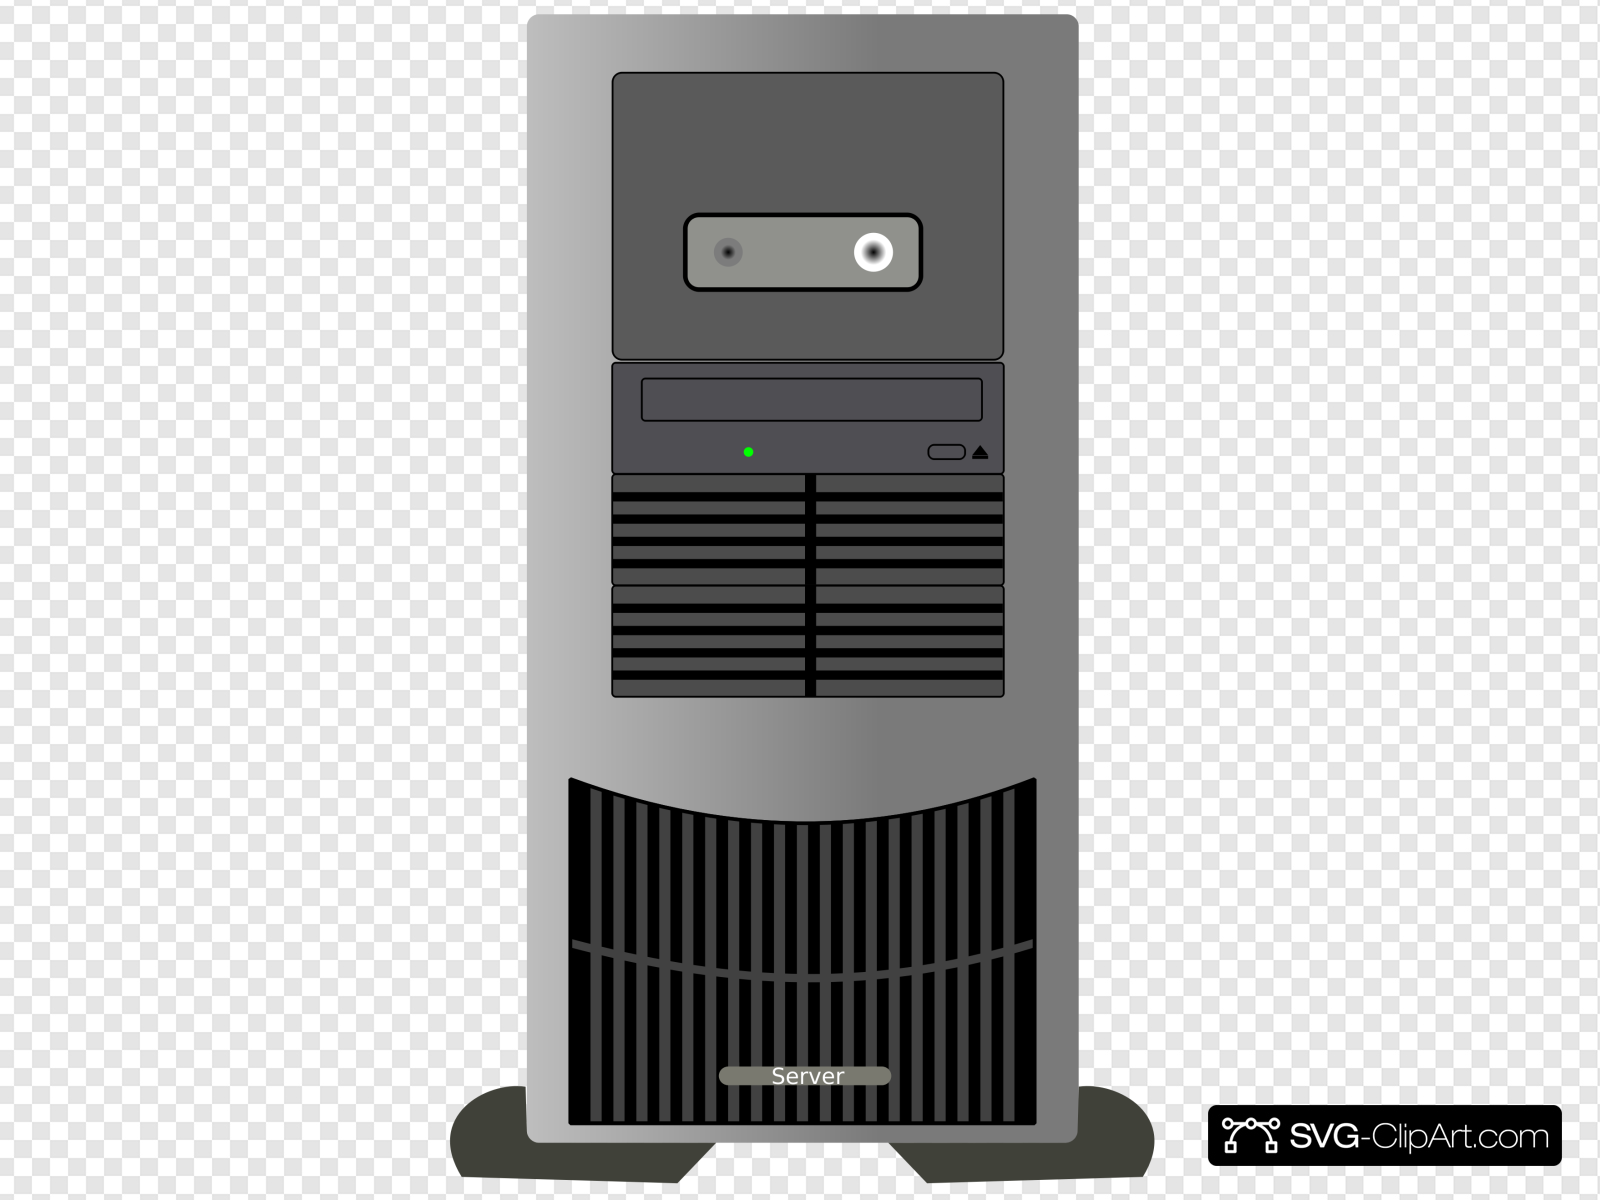 Computer Tower Clip art, Icon and SVG